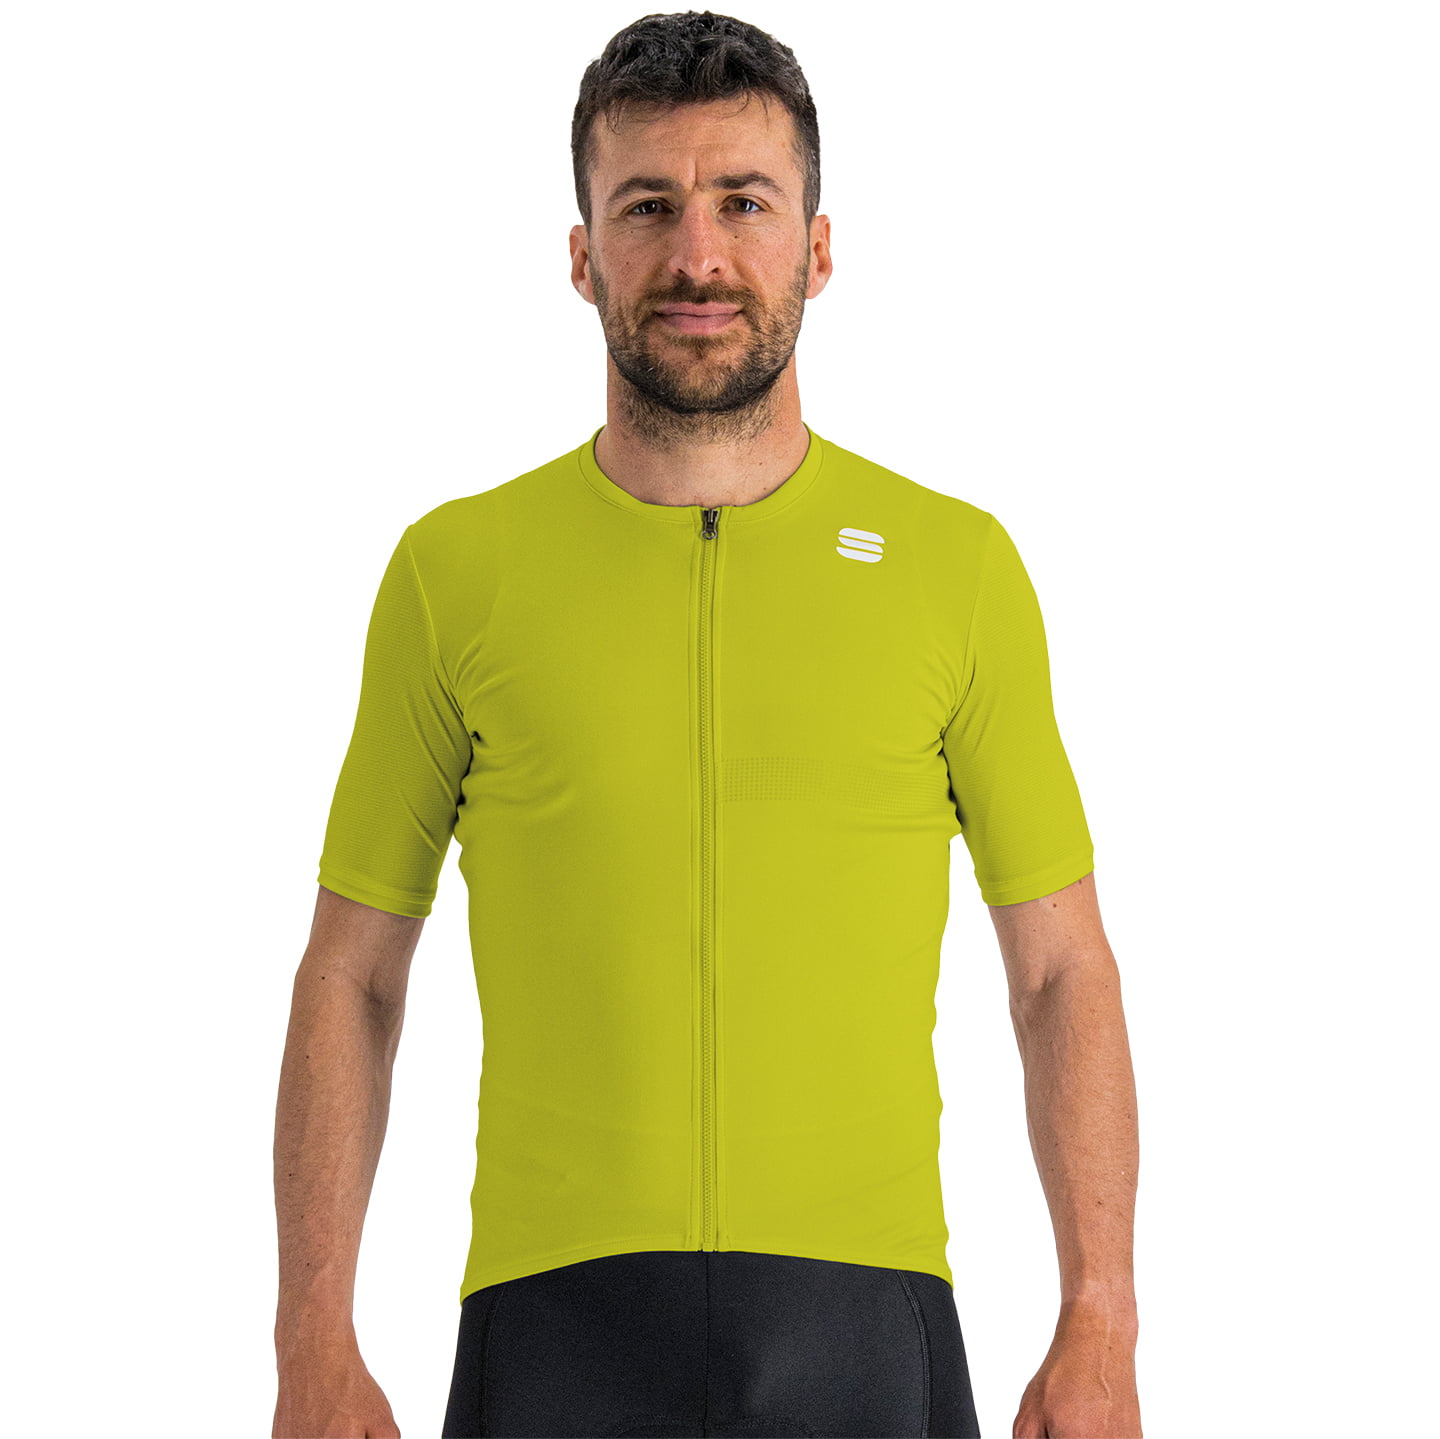 SPORTFUL Matchy Short Sleeve Jersey Short Sleeve Jersey, for men, size XL, Cycling jersey, Cycle clothing